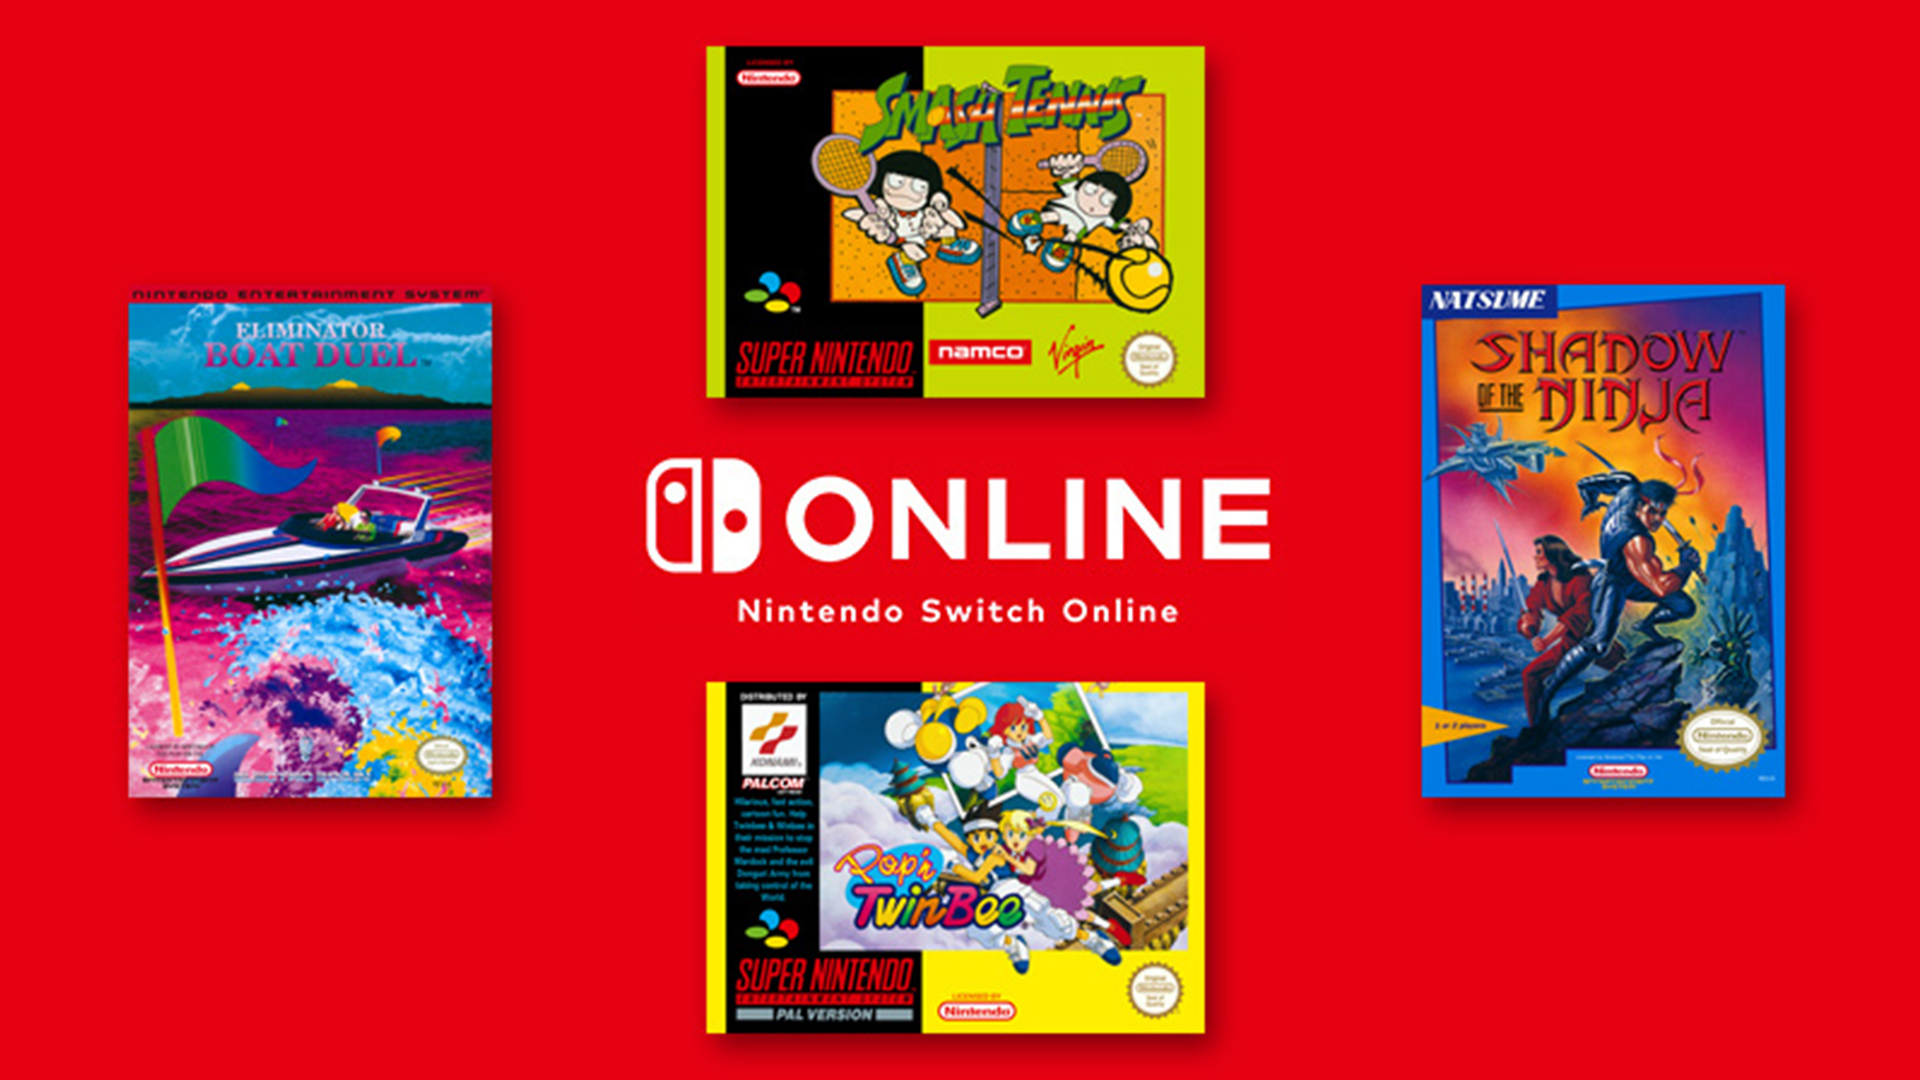 SNES and NES Nintendo Switch Online Games for February ...